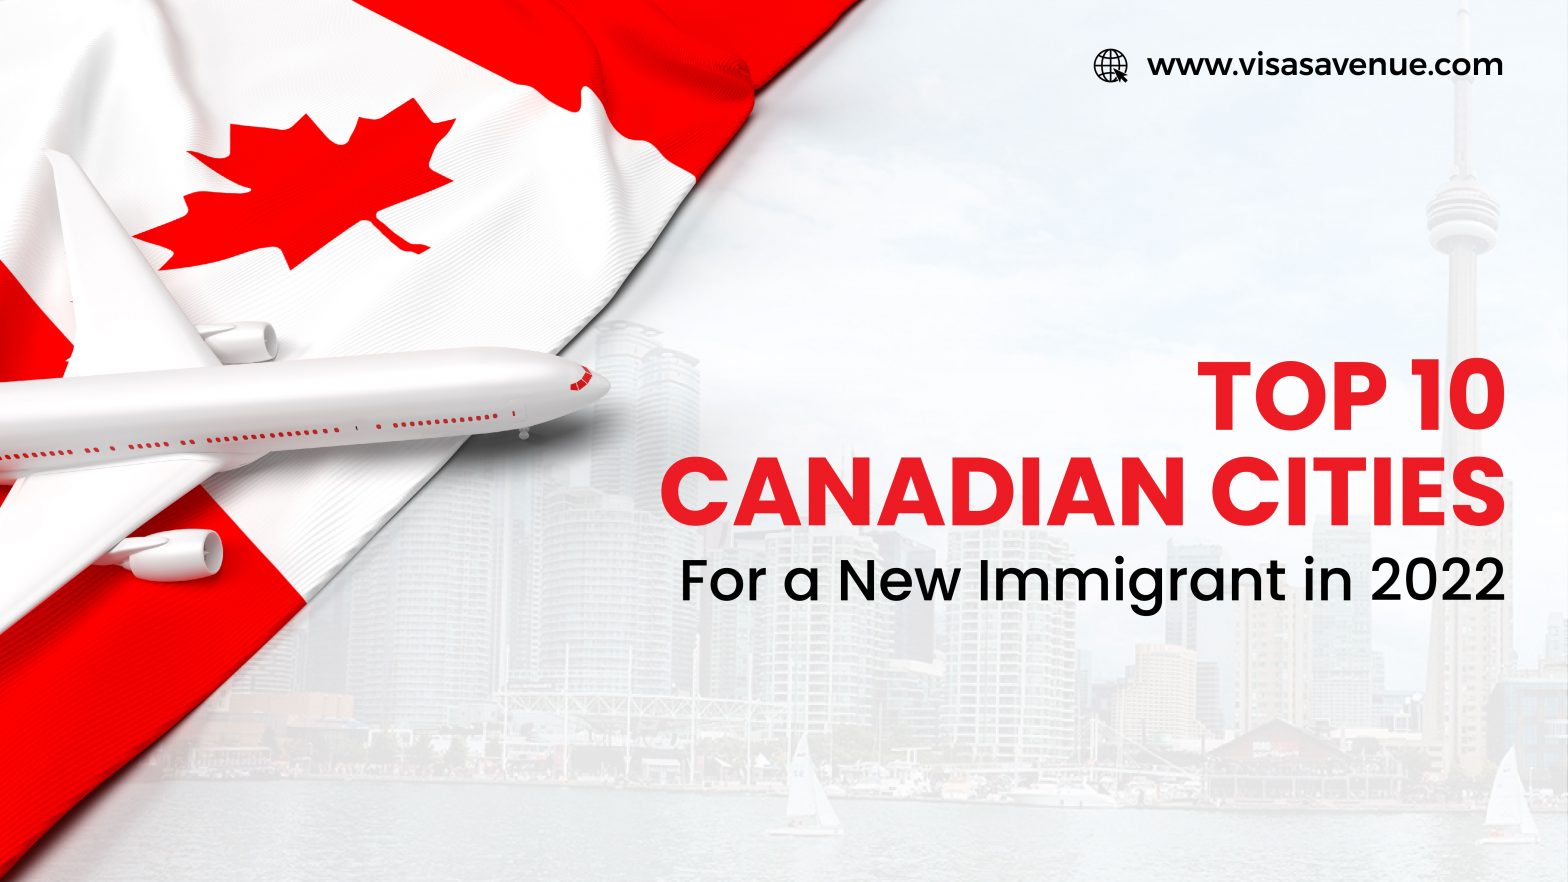 Top 10 Canadian Cities for a New Immigrant in 2022